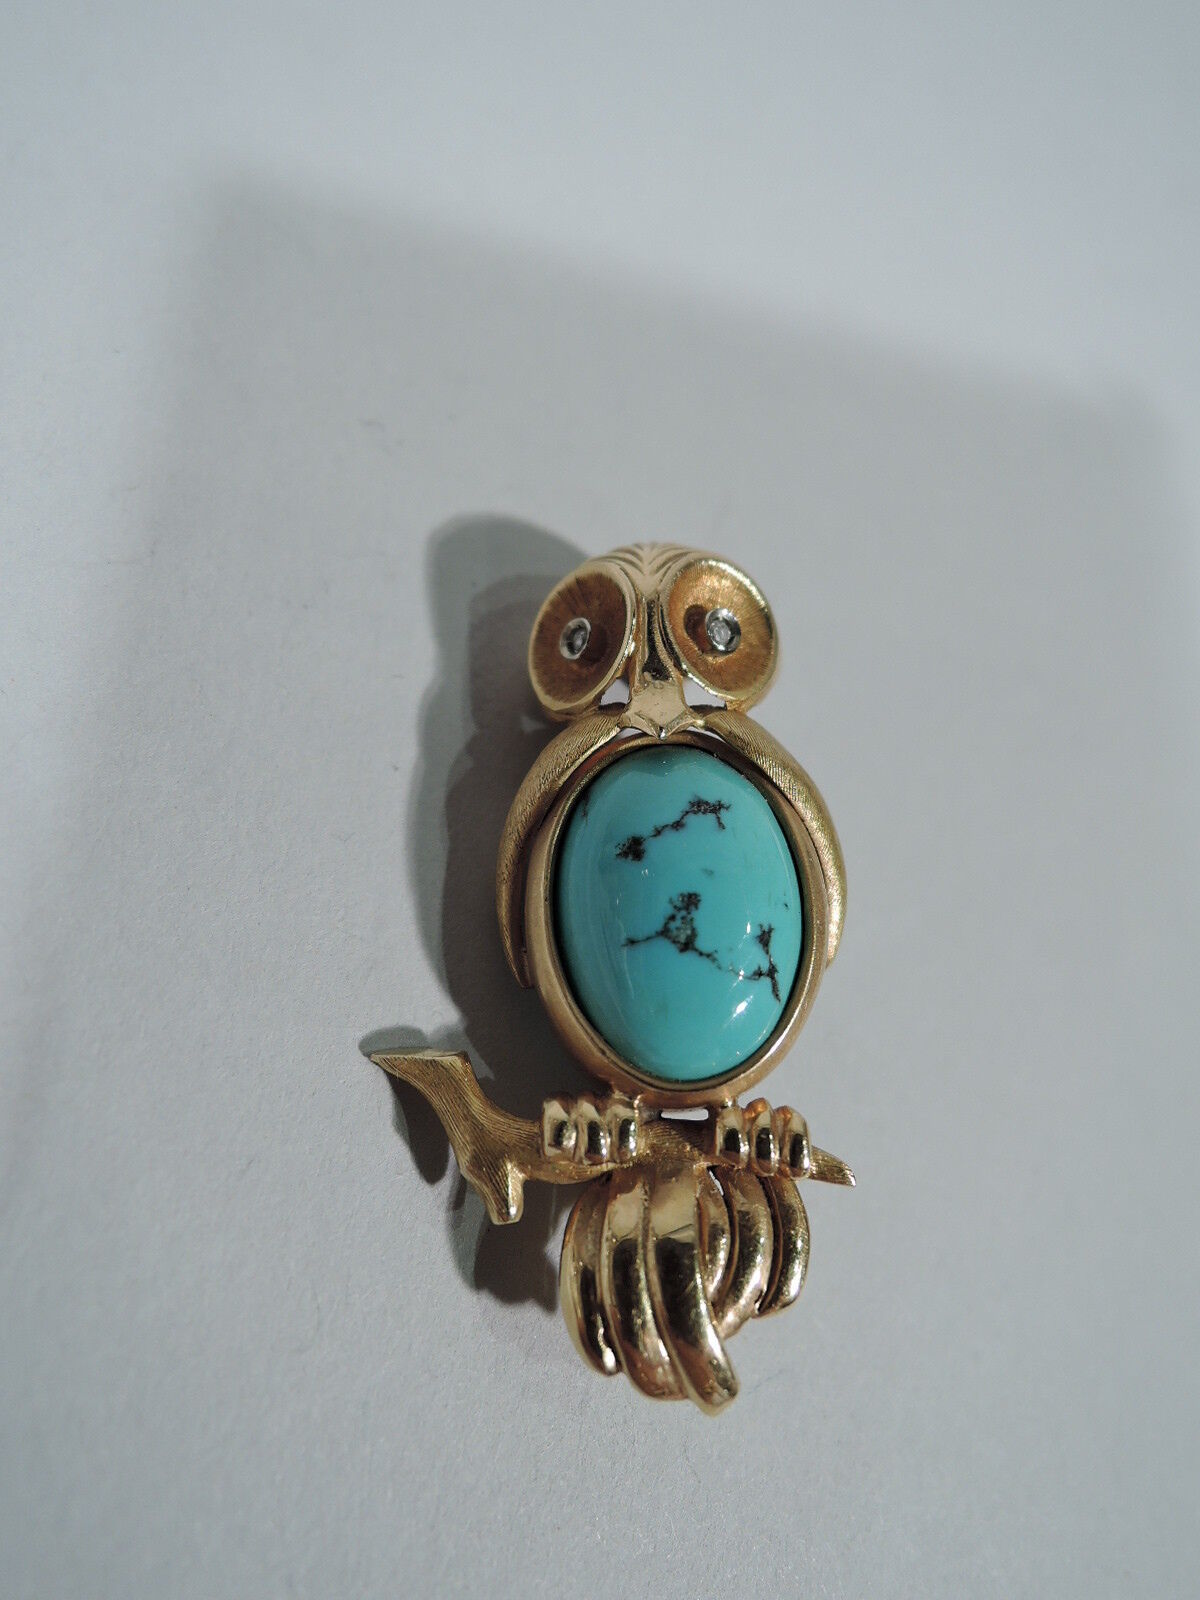 Antique Brooch - Art Deco Modern Wise Owl Pin - American 18K Gold & Turquoise